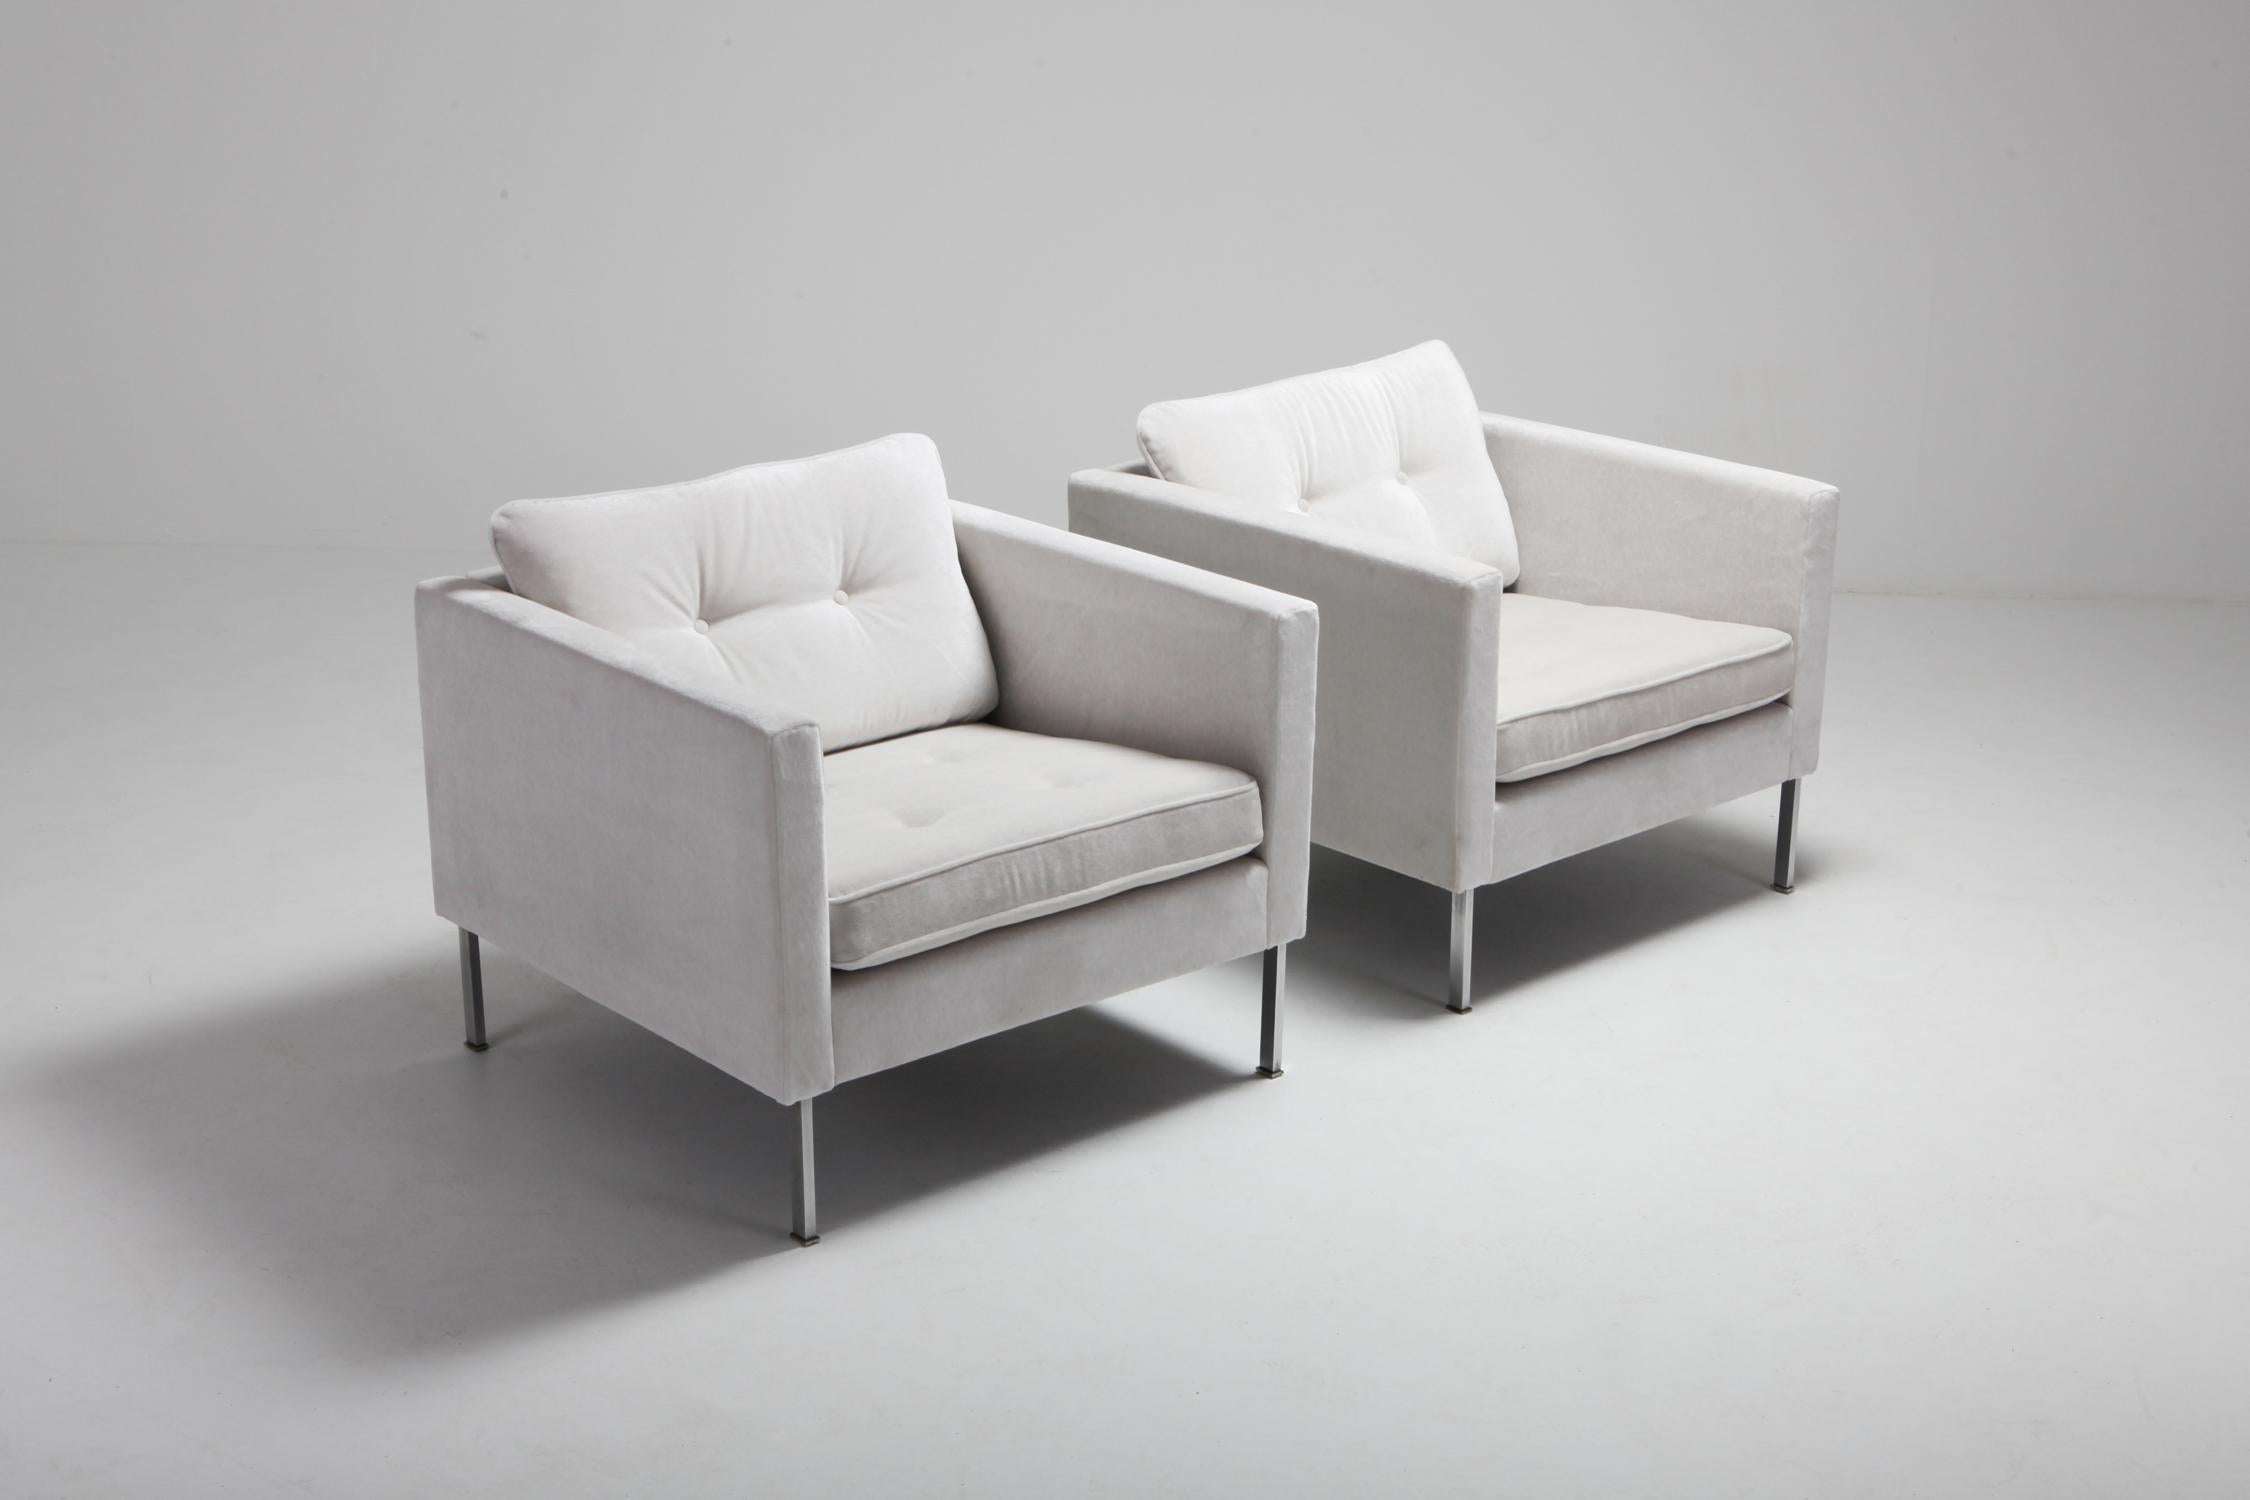 Very nice pair of 446 lounge chairs designed by Pierre Paulin and manufactured by Artifort, Holland 1962. 
The chairs have been newly upholstered in off white / light grey velvet. The chairs have solid steel legs, chrome-plated. 
This is an